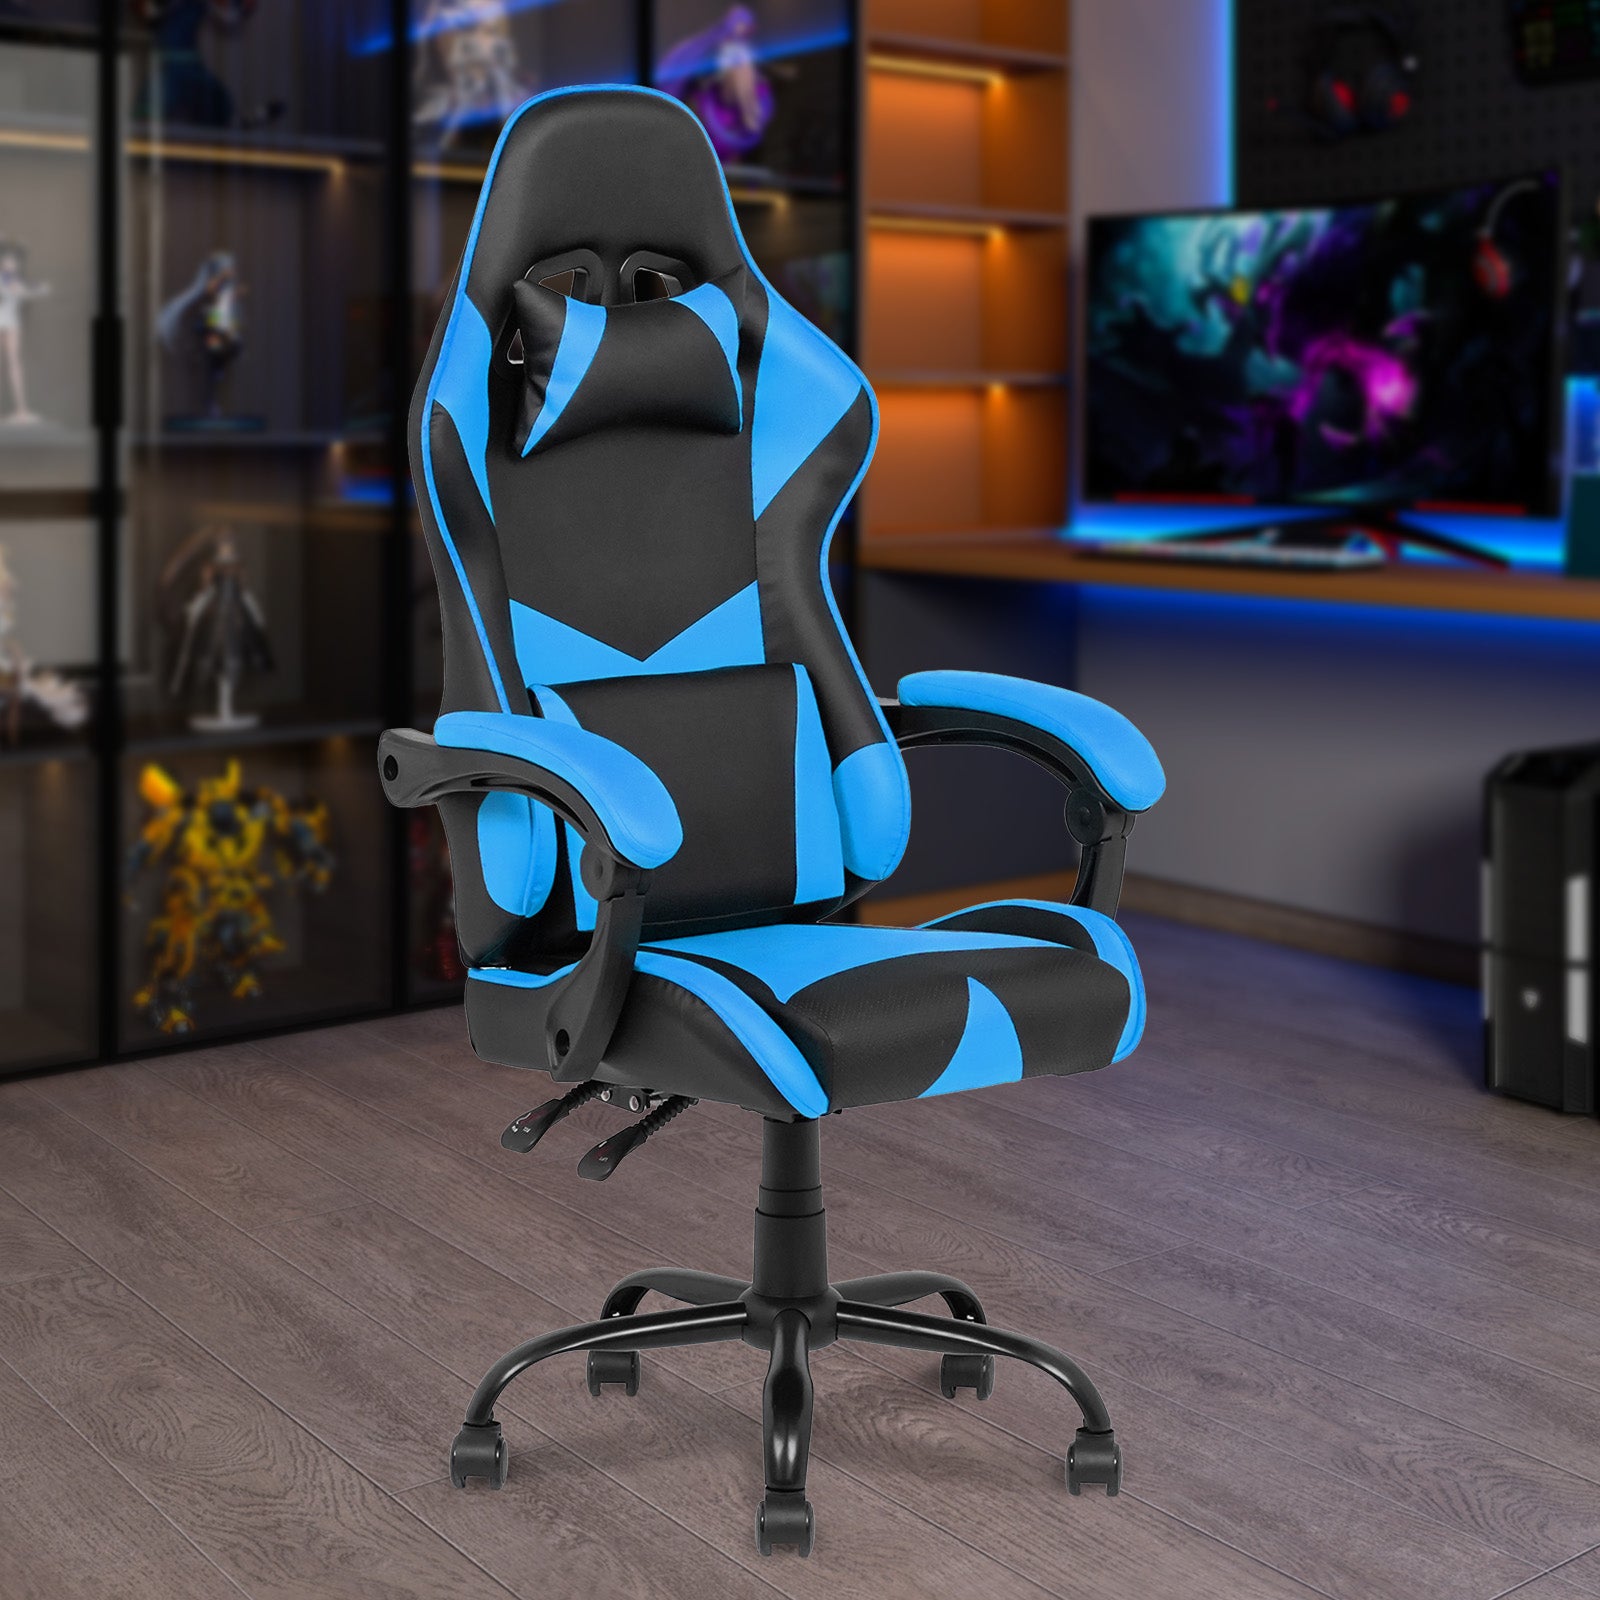 Advwin Gaming Chair Ergonomic Racing Recliner Reclining Executive Office Computer Seat Blue